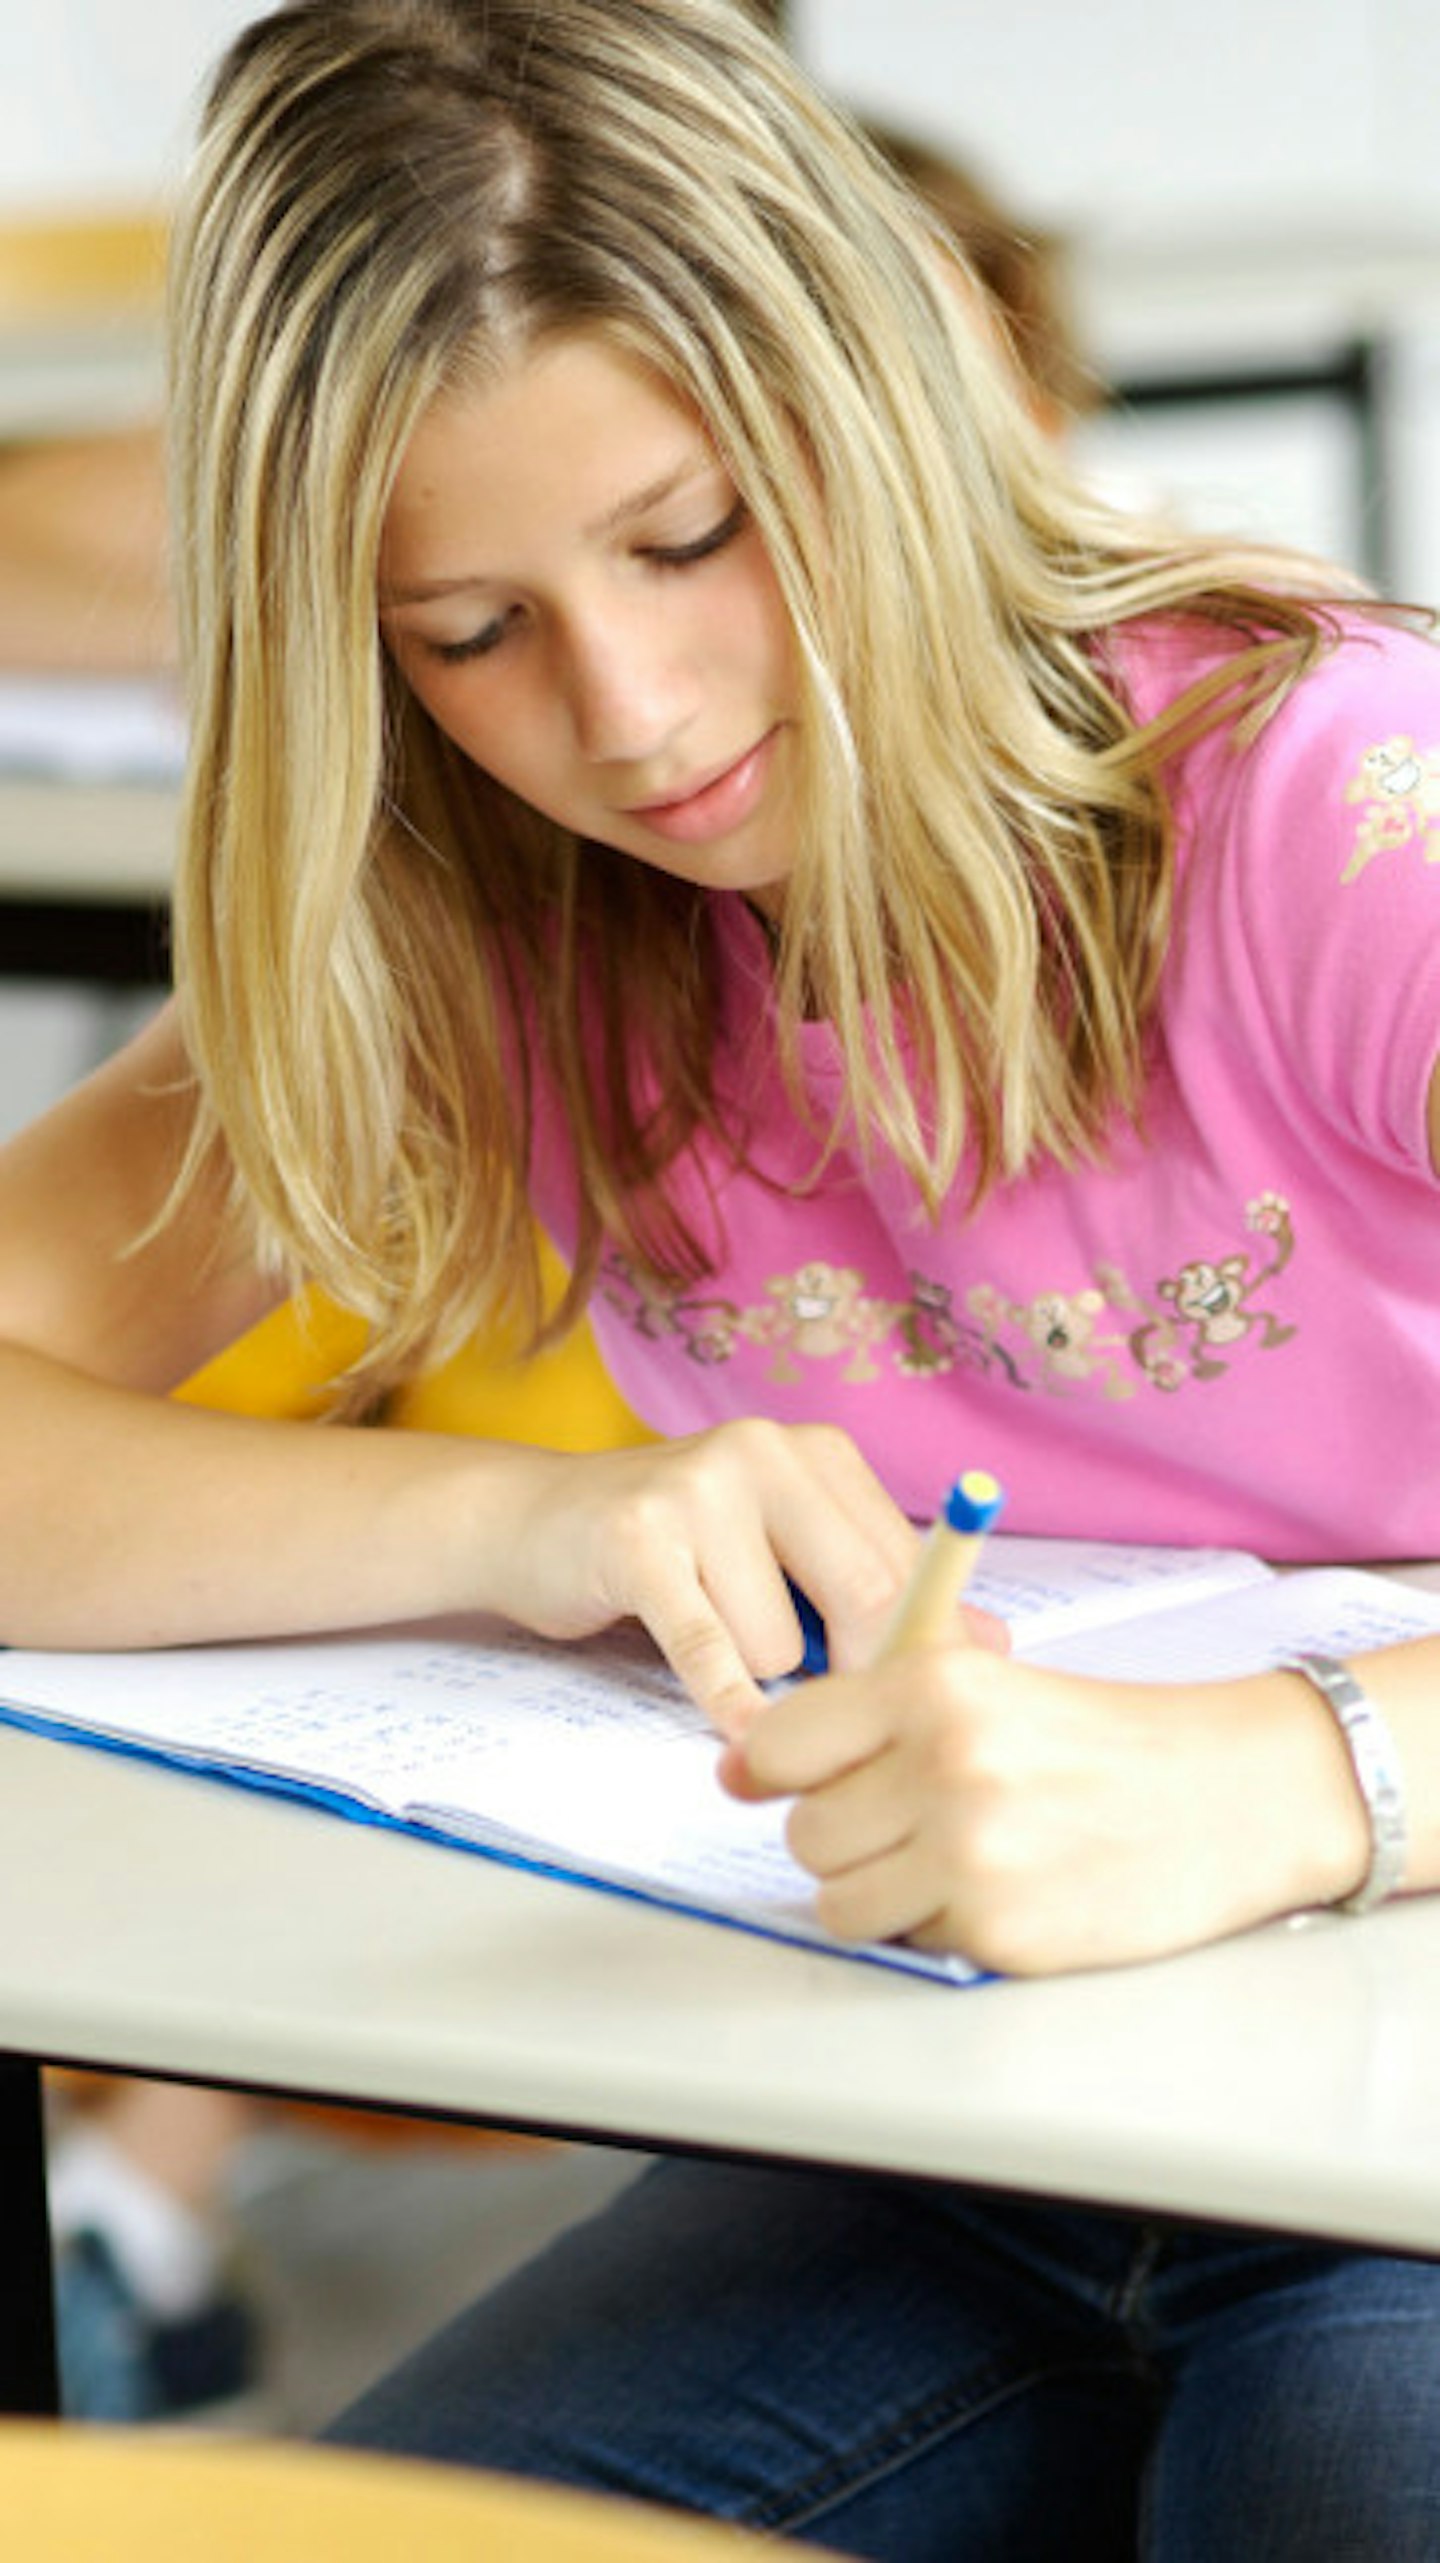 Dr Kelley believes exam results could improve (stock image)